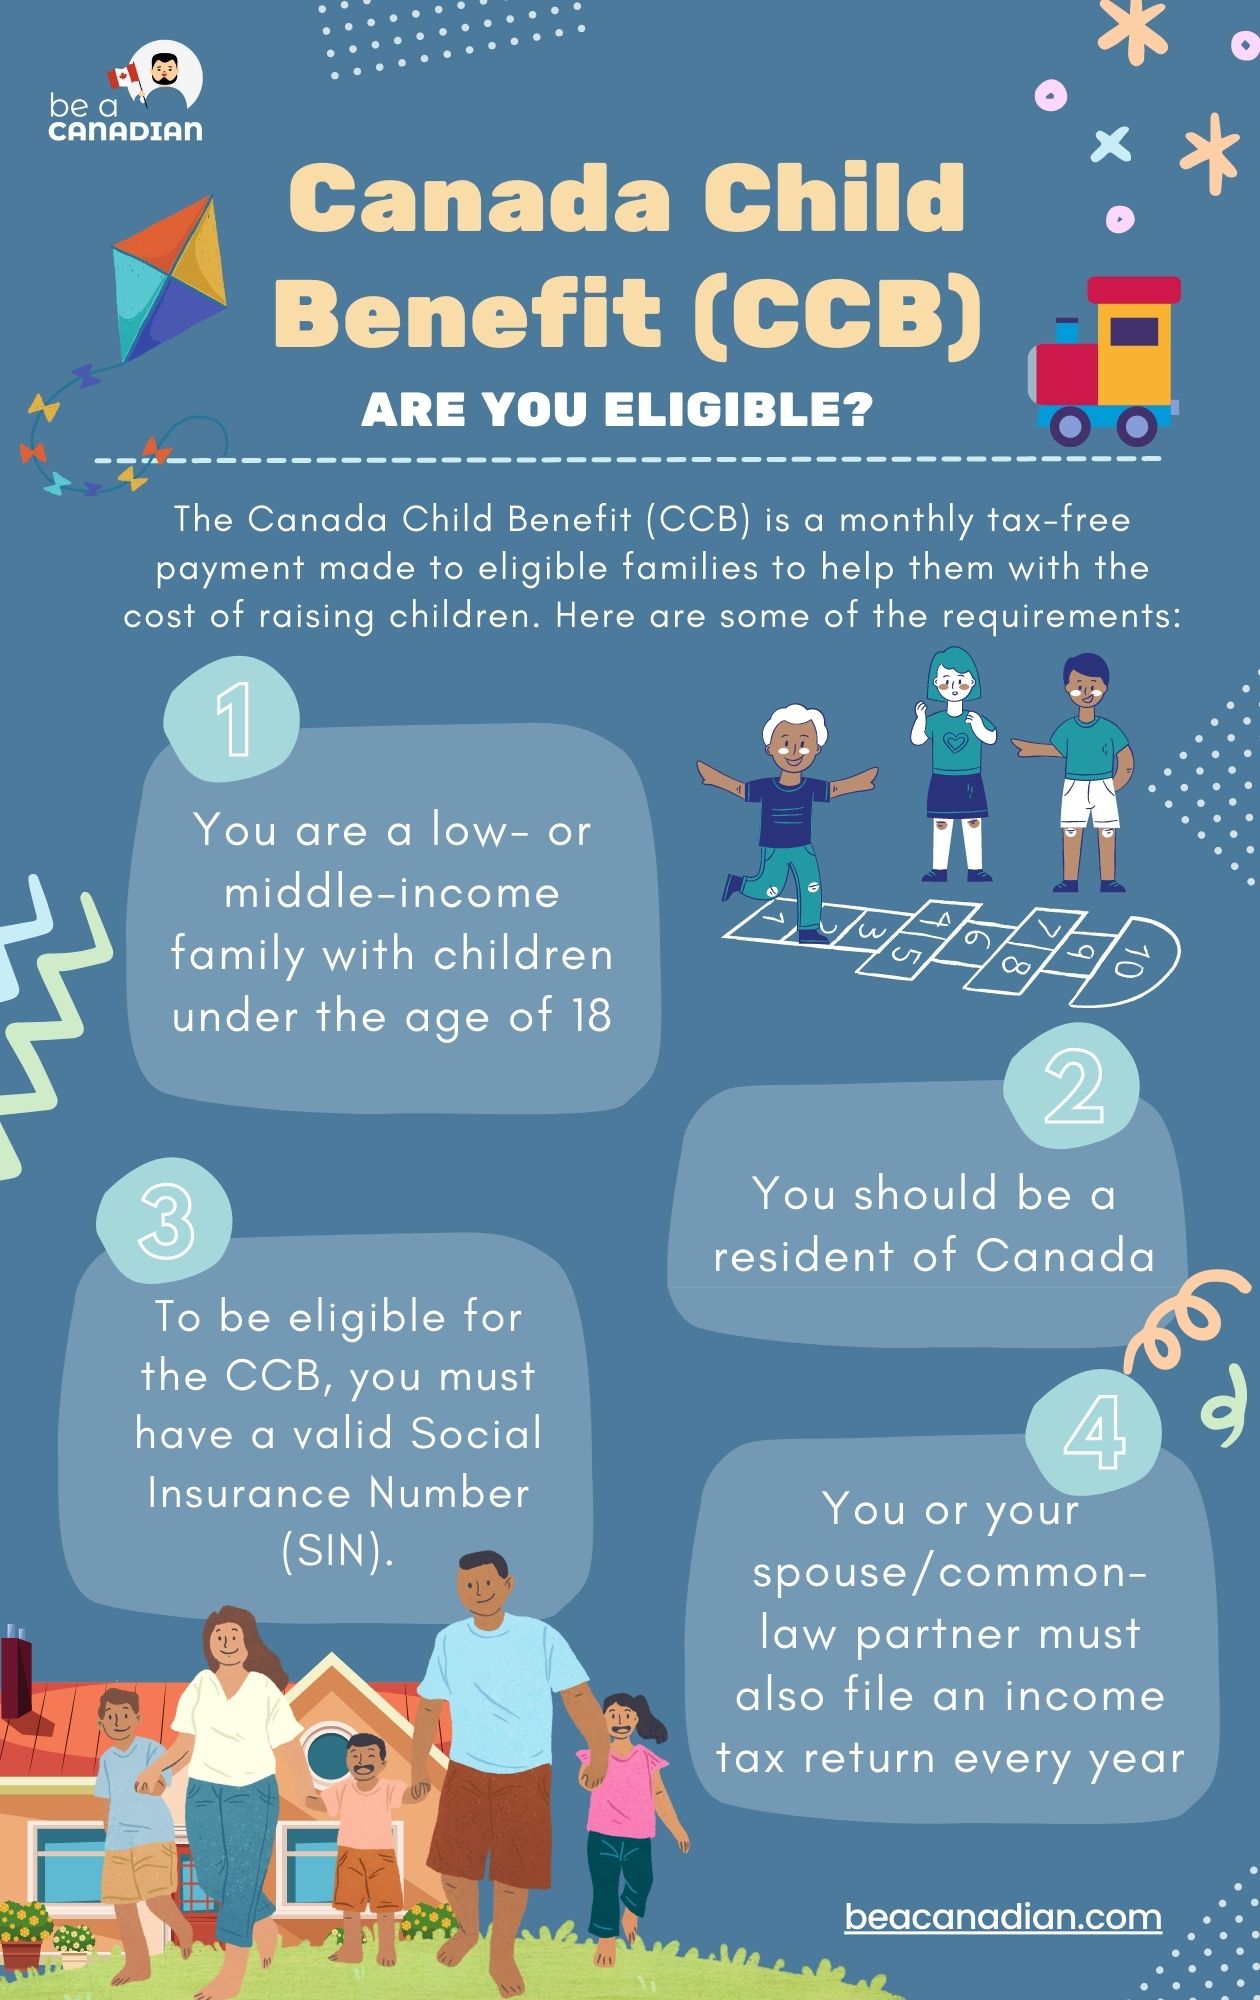 Canada-Child-Benefit-Eligibility-Infographic-by-Be-a-Canadian